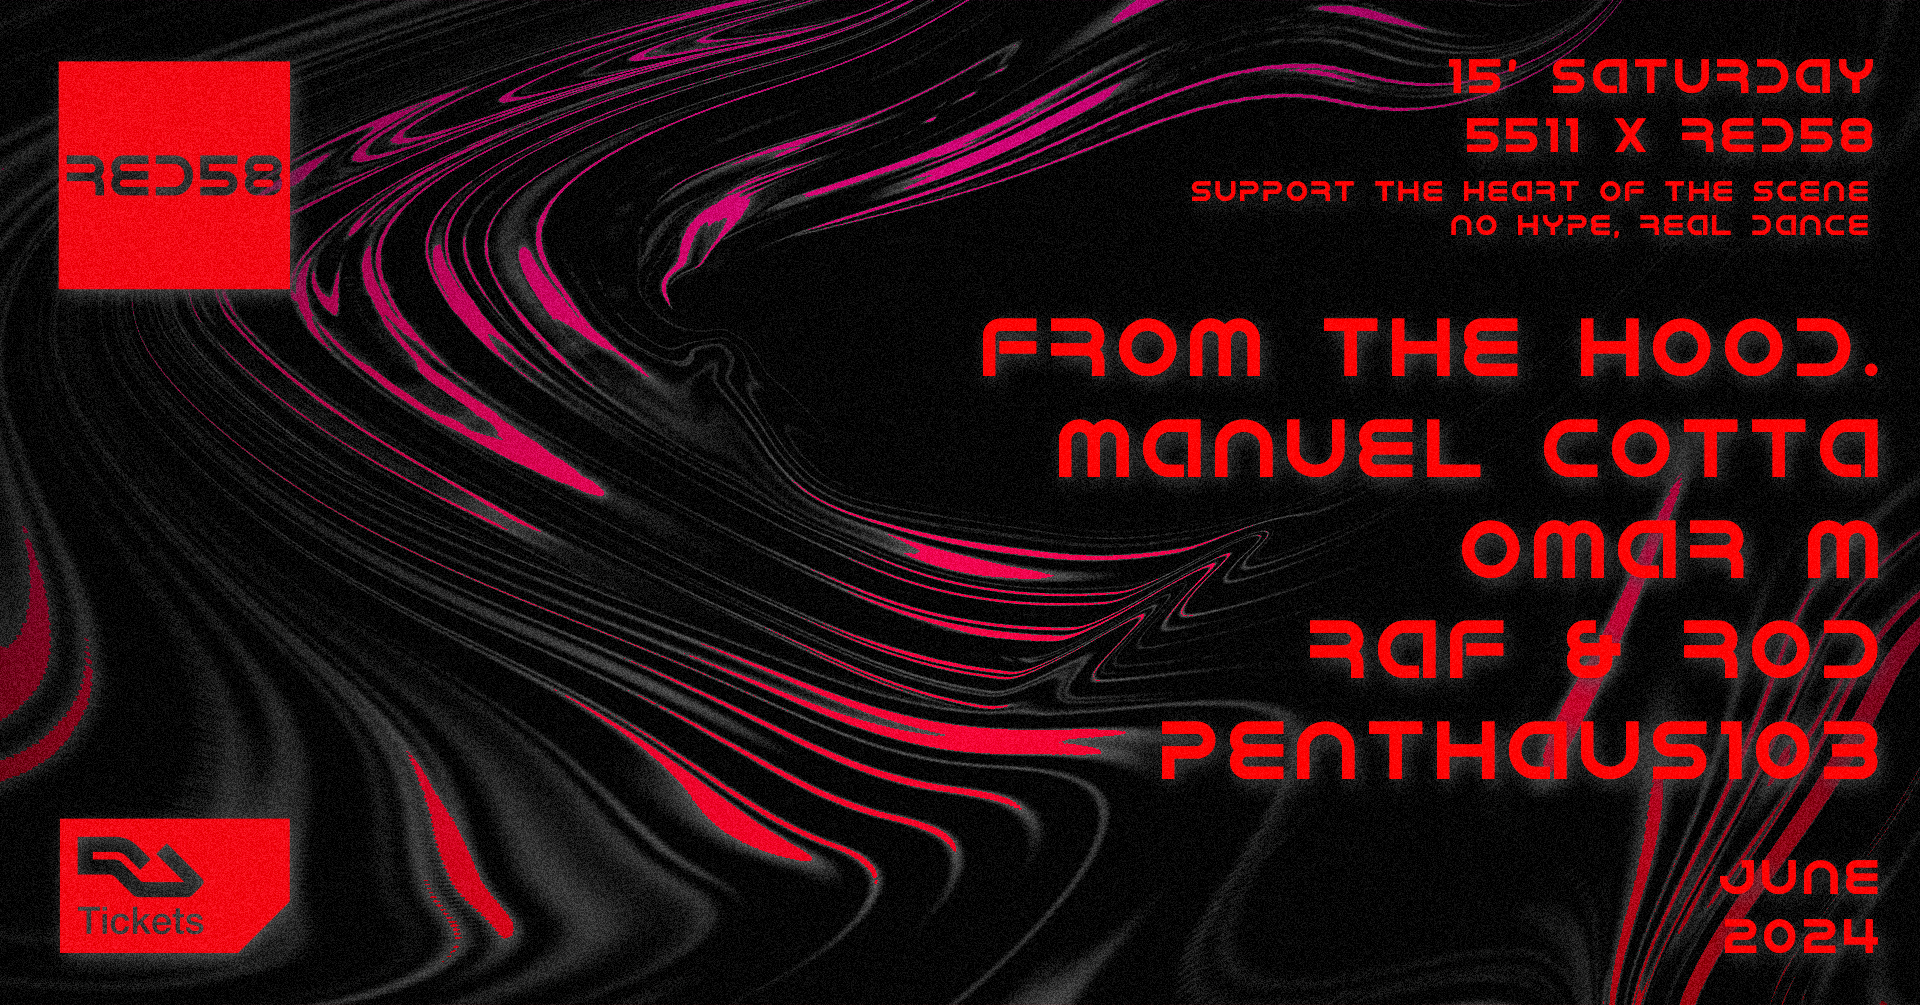 5511 x RED58 'From the hood' with Manuel Cotta, Omar M, Raf & Rod & Penthaus103 - フライヤー表